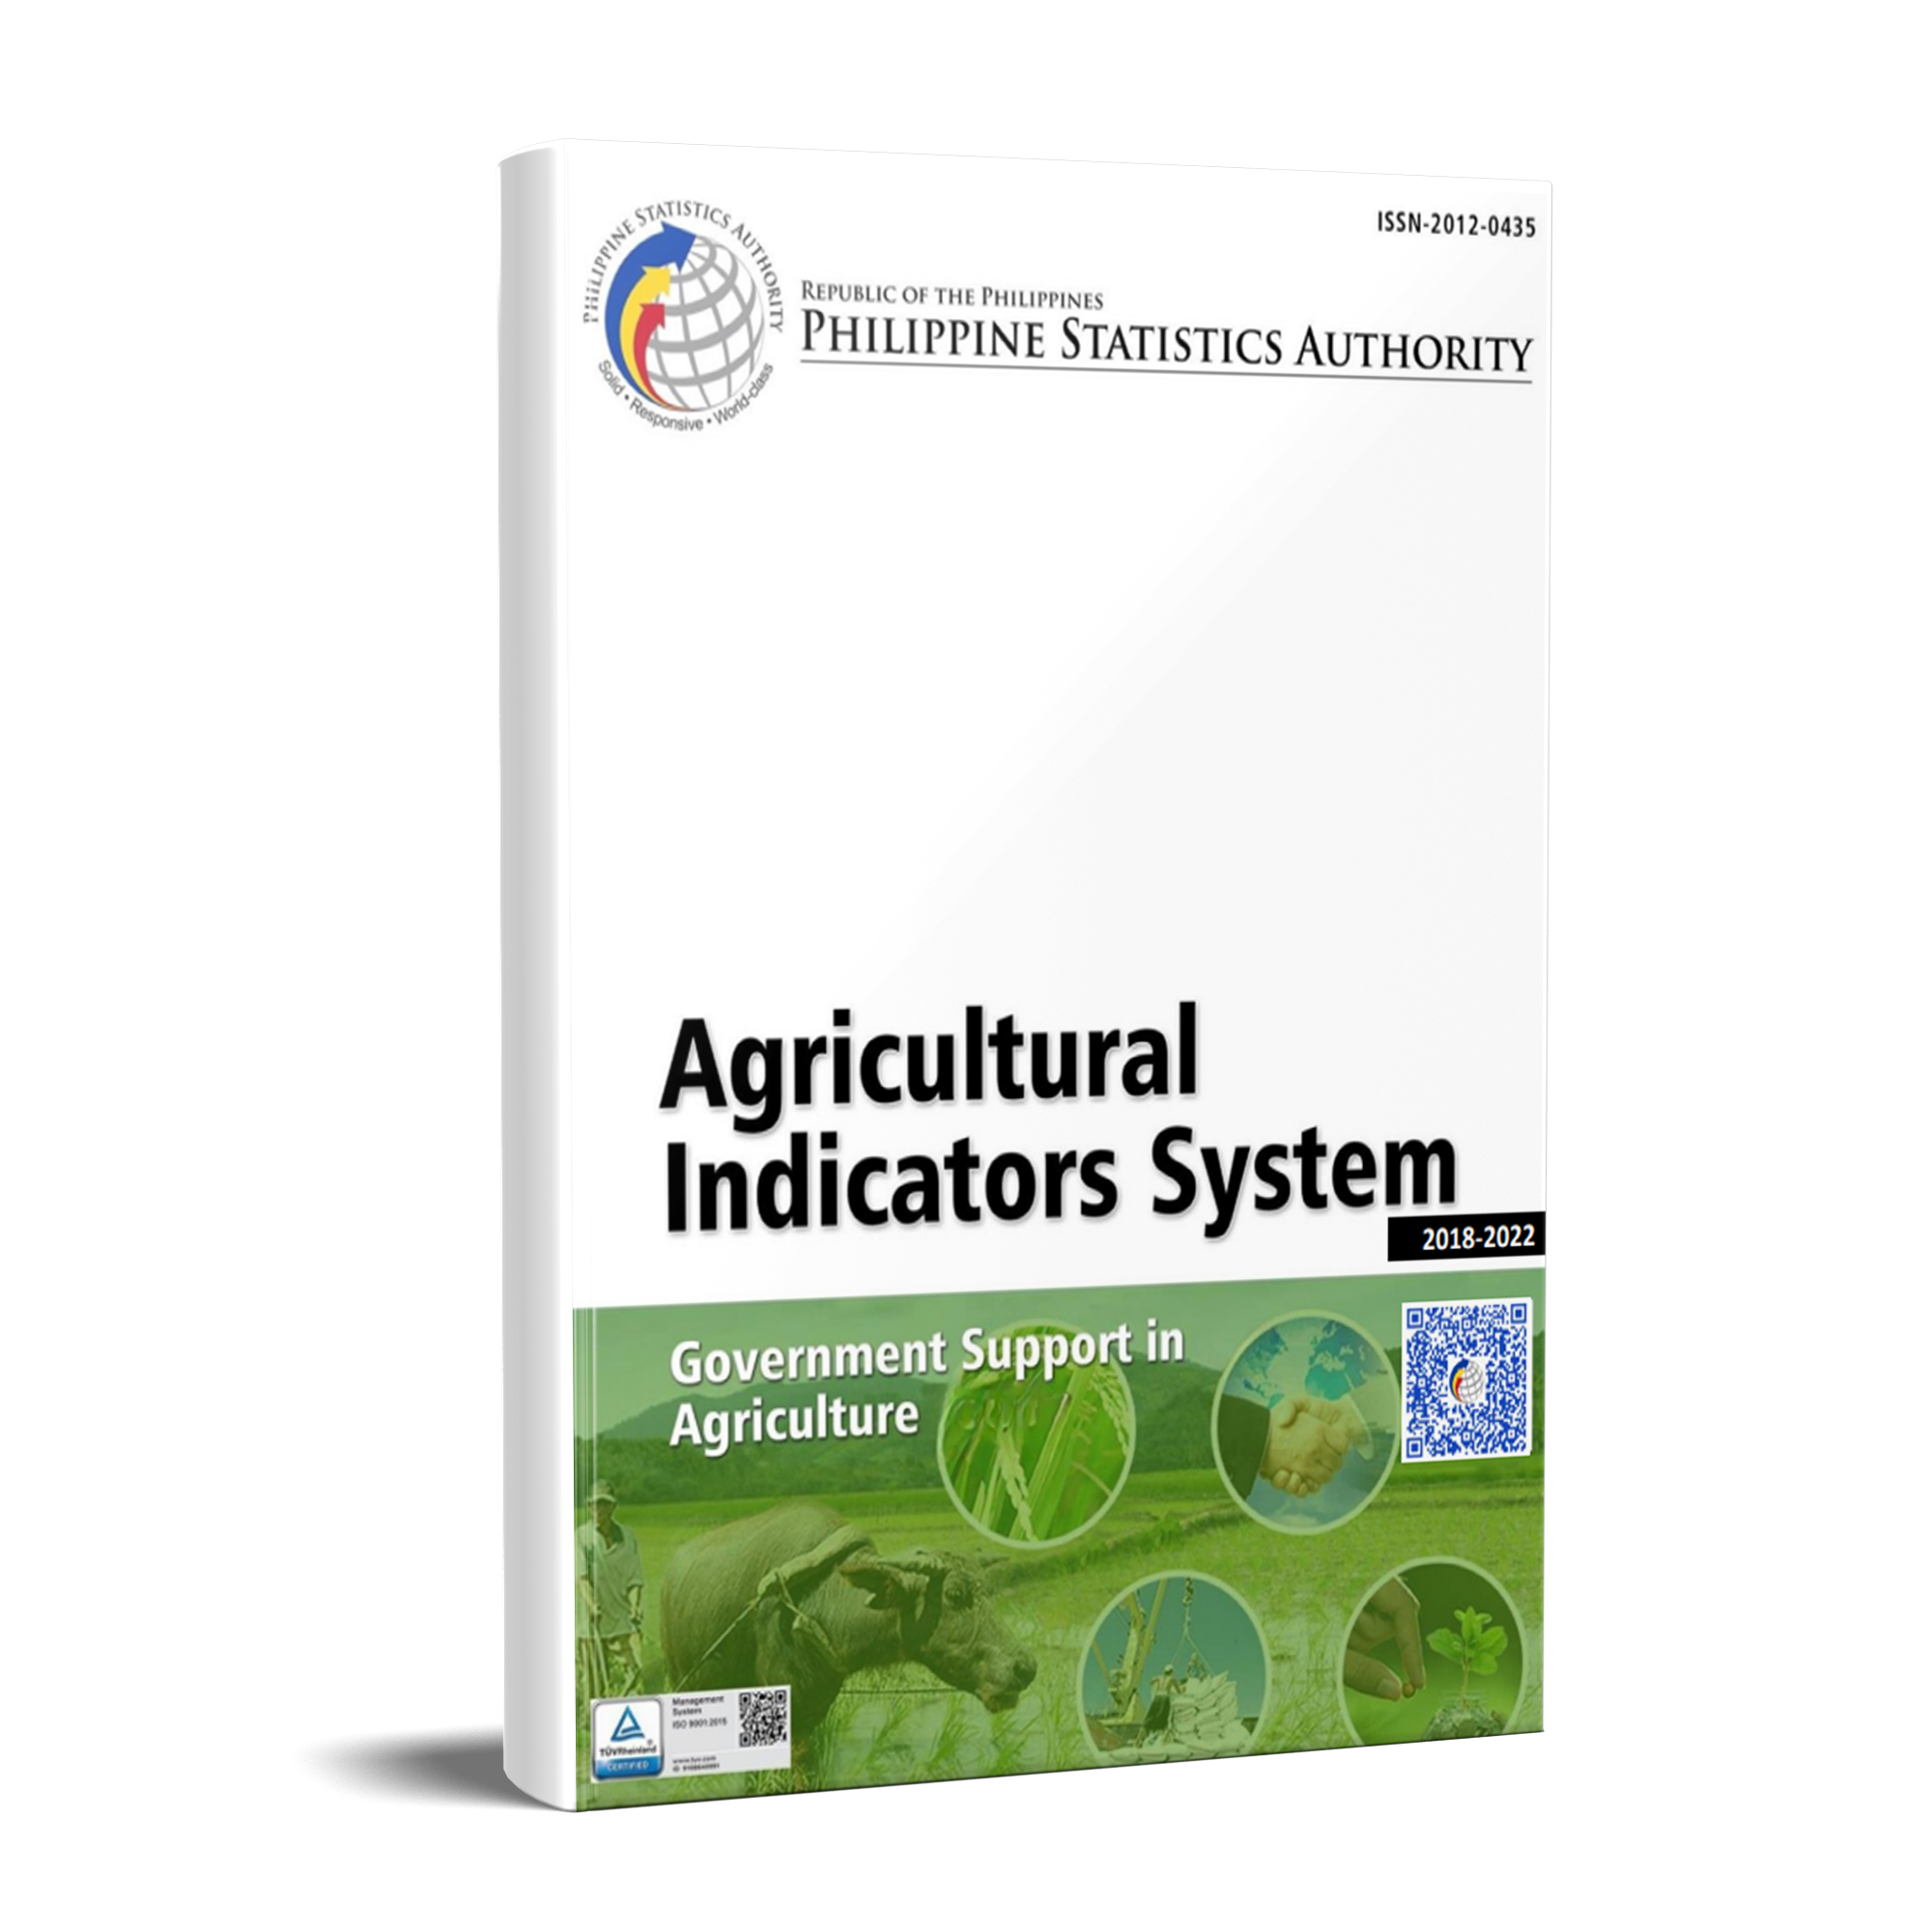 Agricultural Indicators System: Government Support in Agriculture